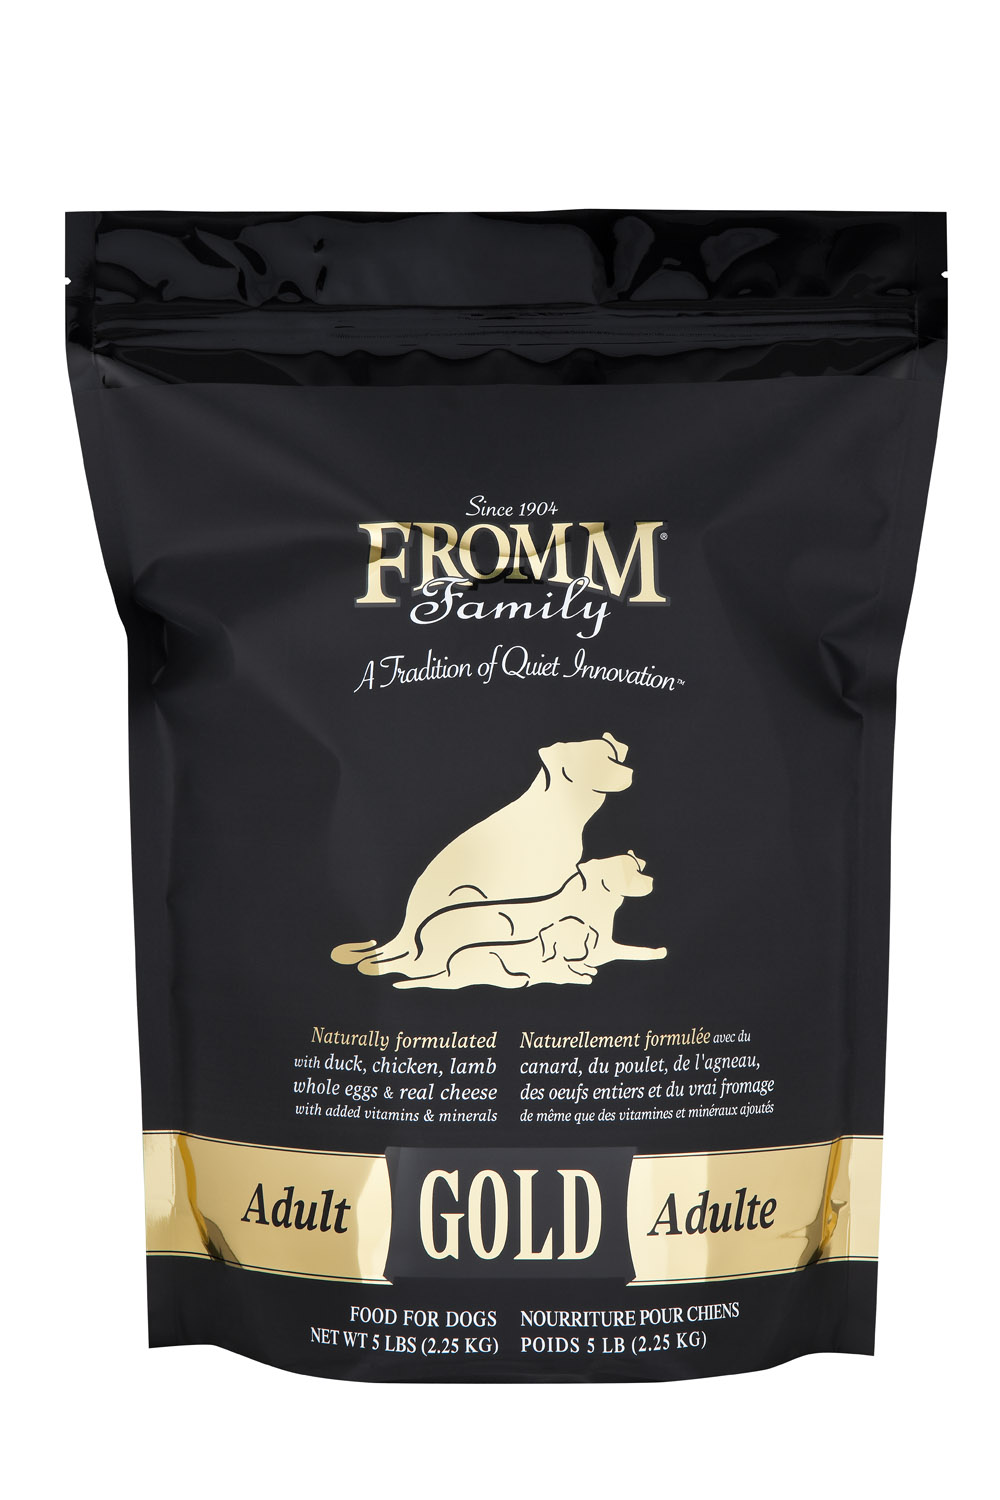 Fromm Family Adult Gold Food for Dogs, 5 lbs